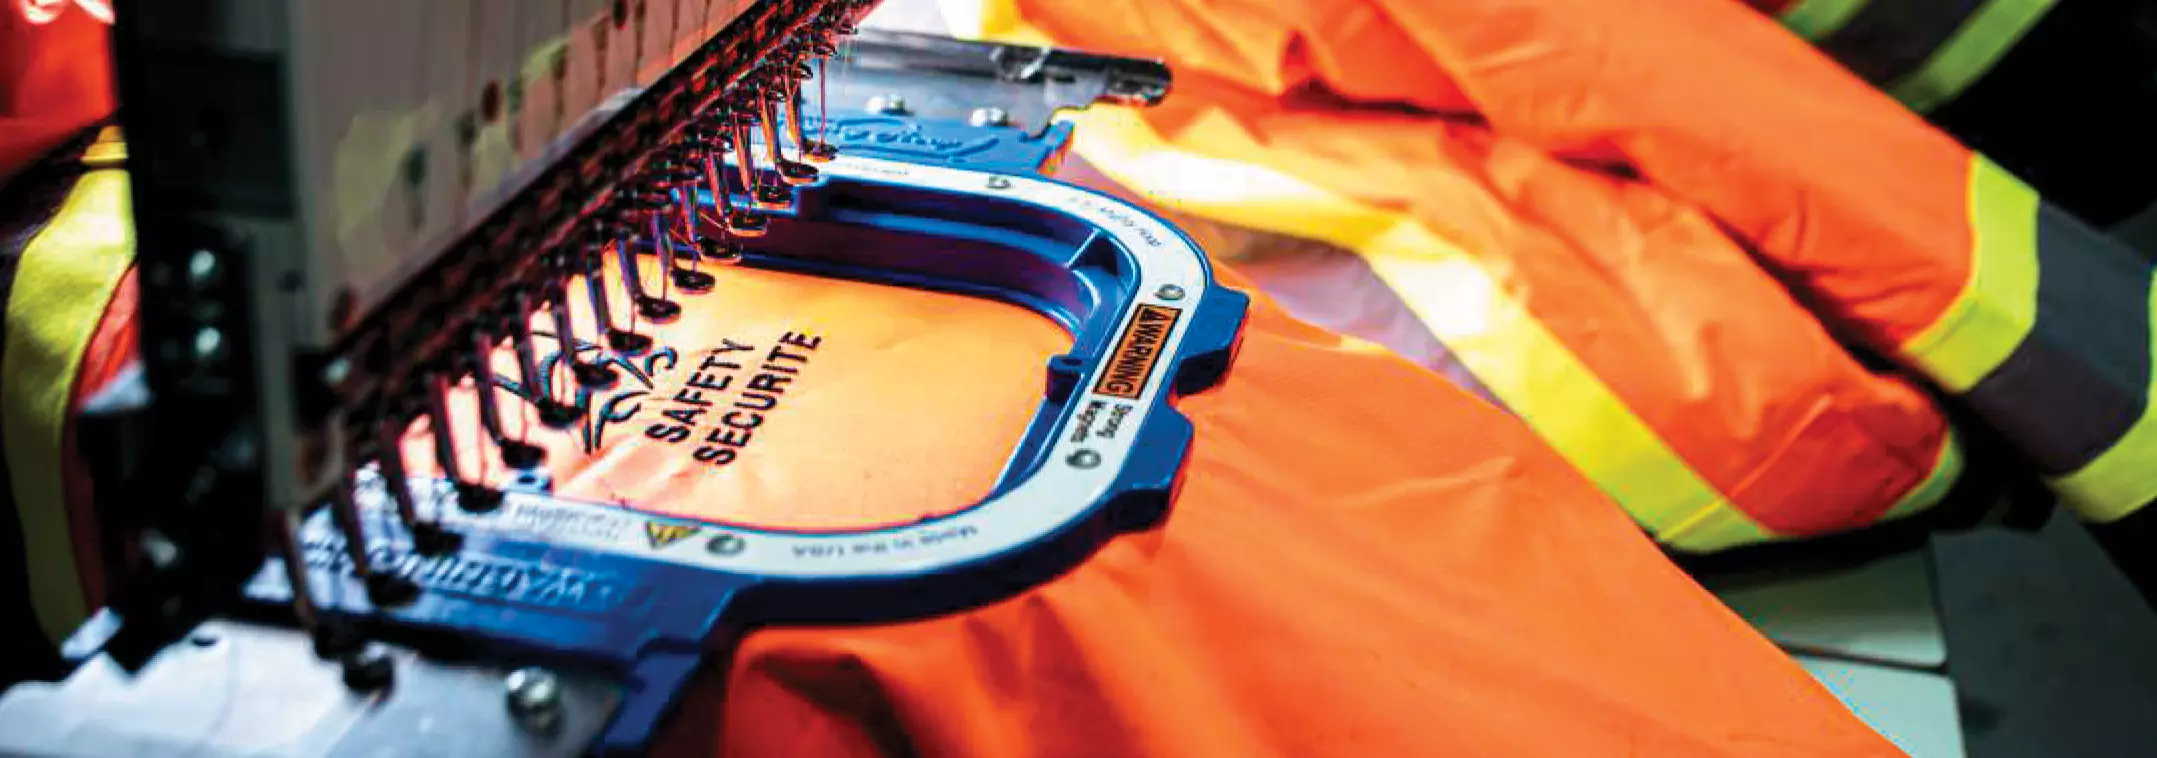 Embroidery uses tread and needle to embed your logo onto the garment